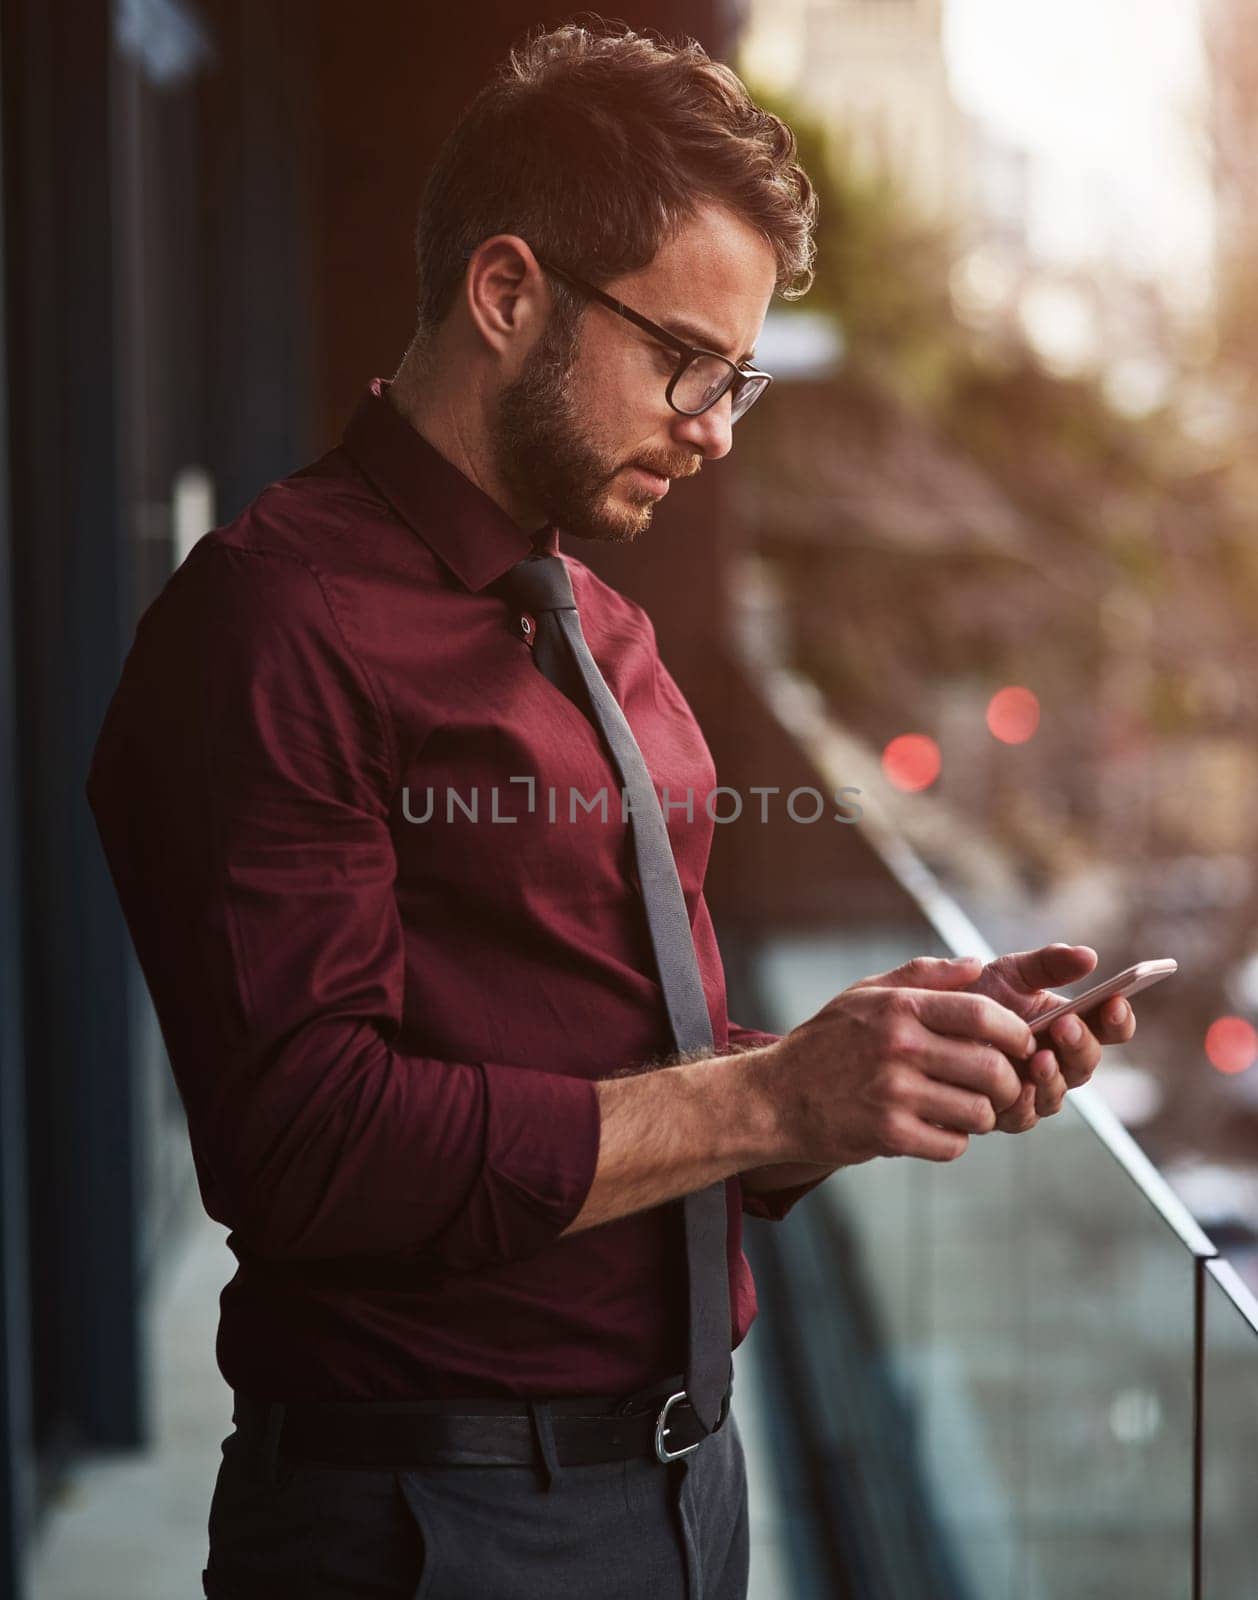 Working that mobile business network. a young businessman using a mobile phone on the balcony of an office